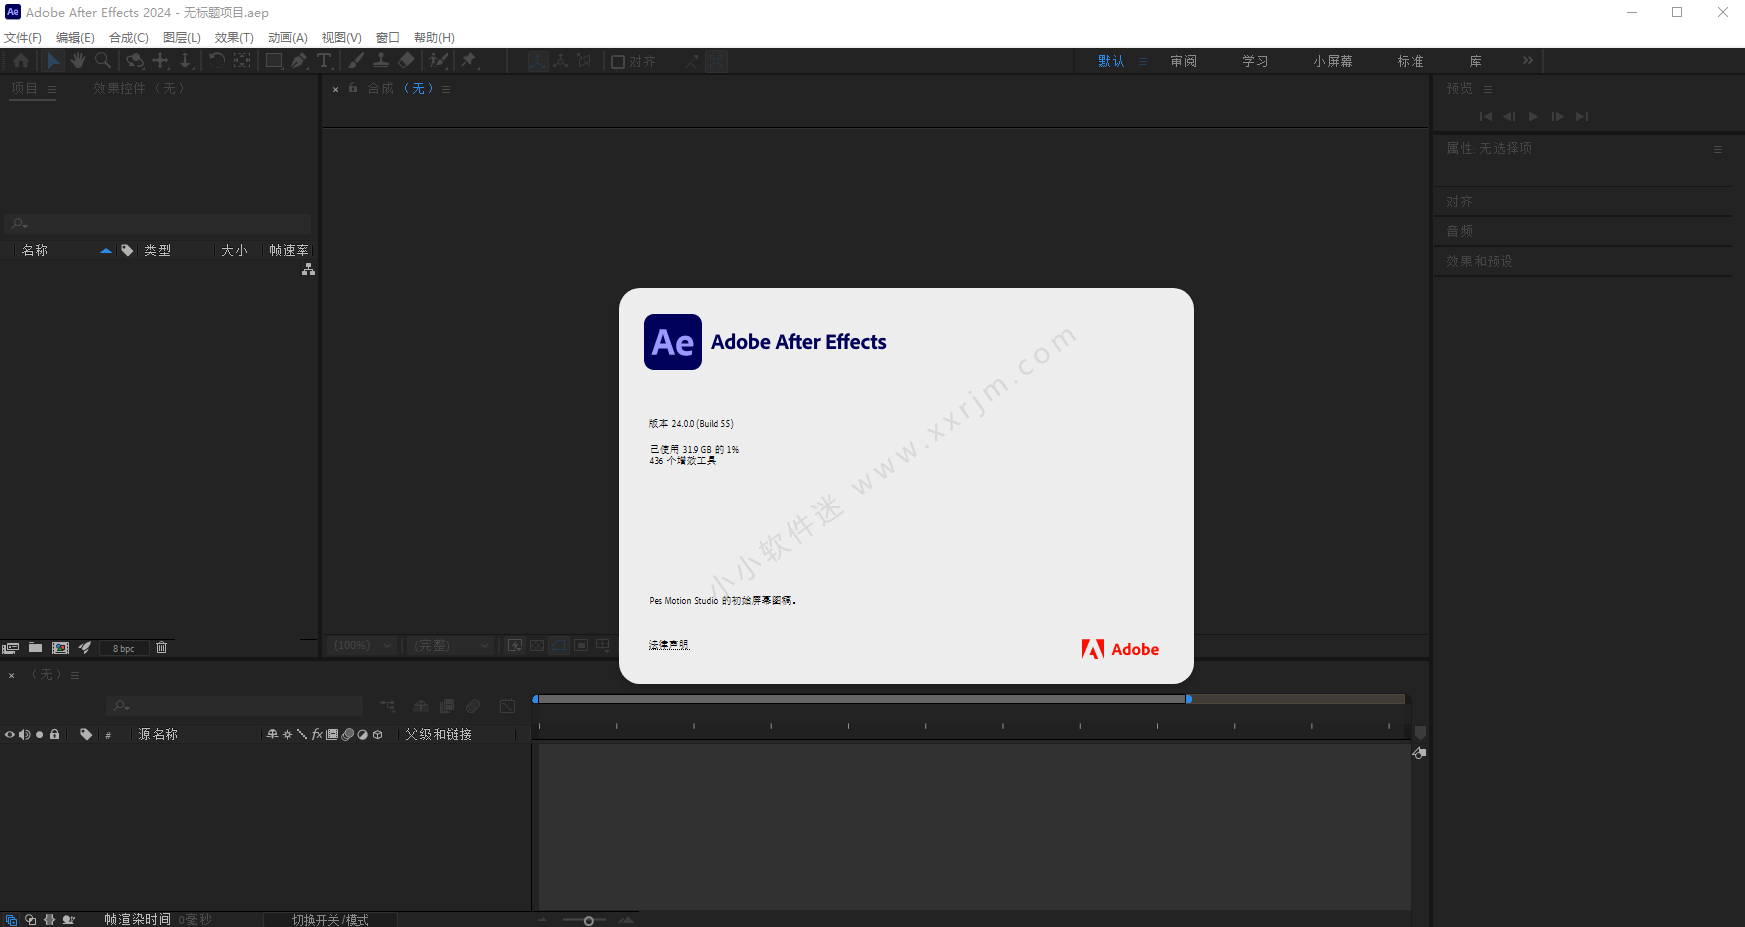 Adobe After Effects 2024 v24.0.0.55 download the new version for windows